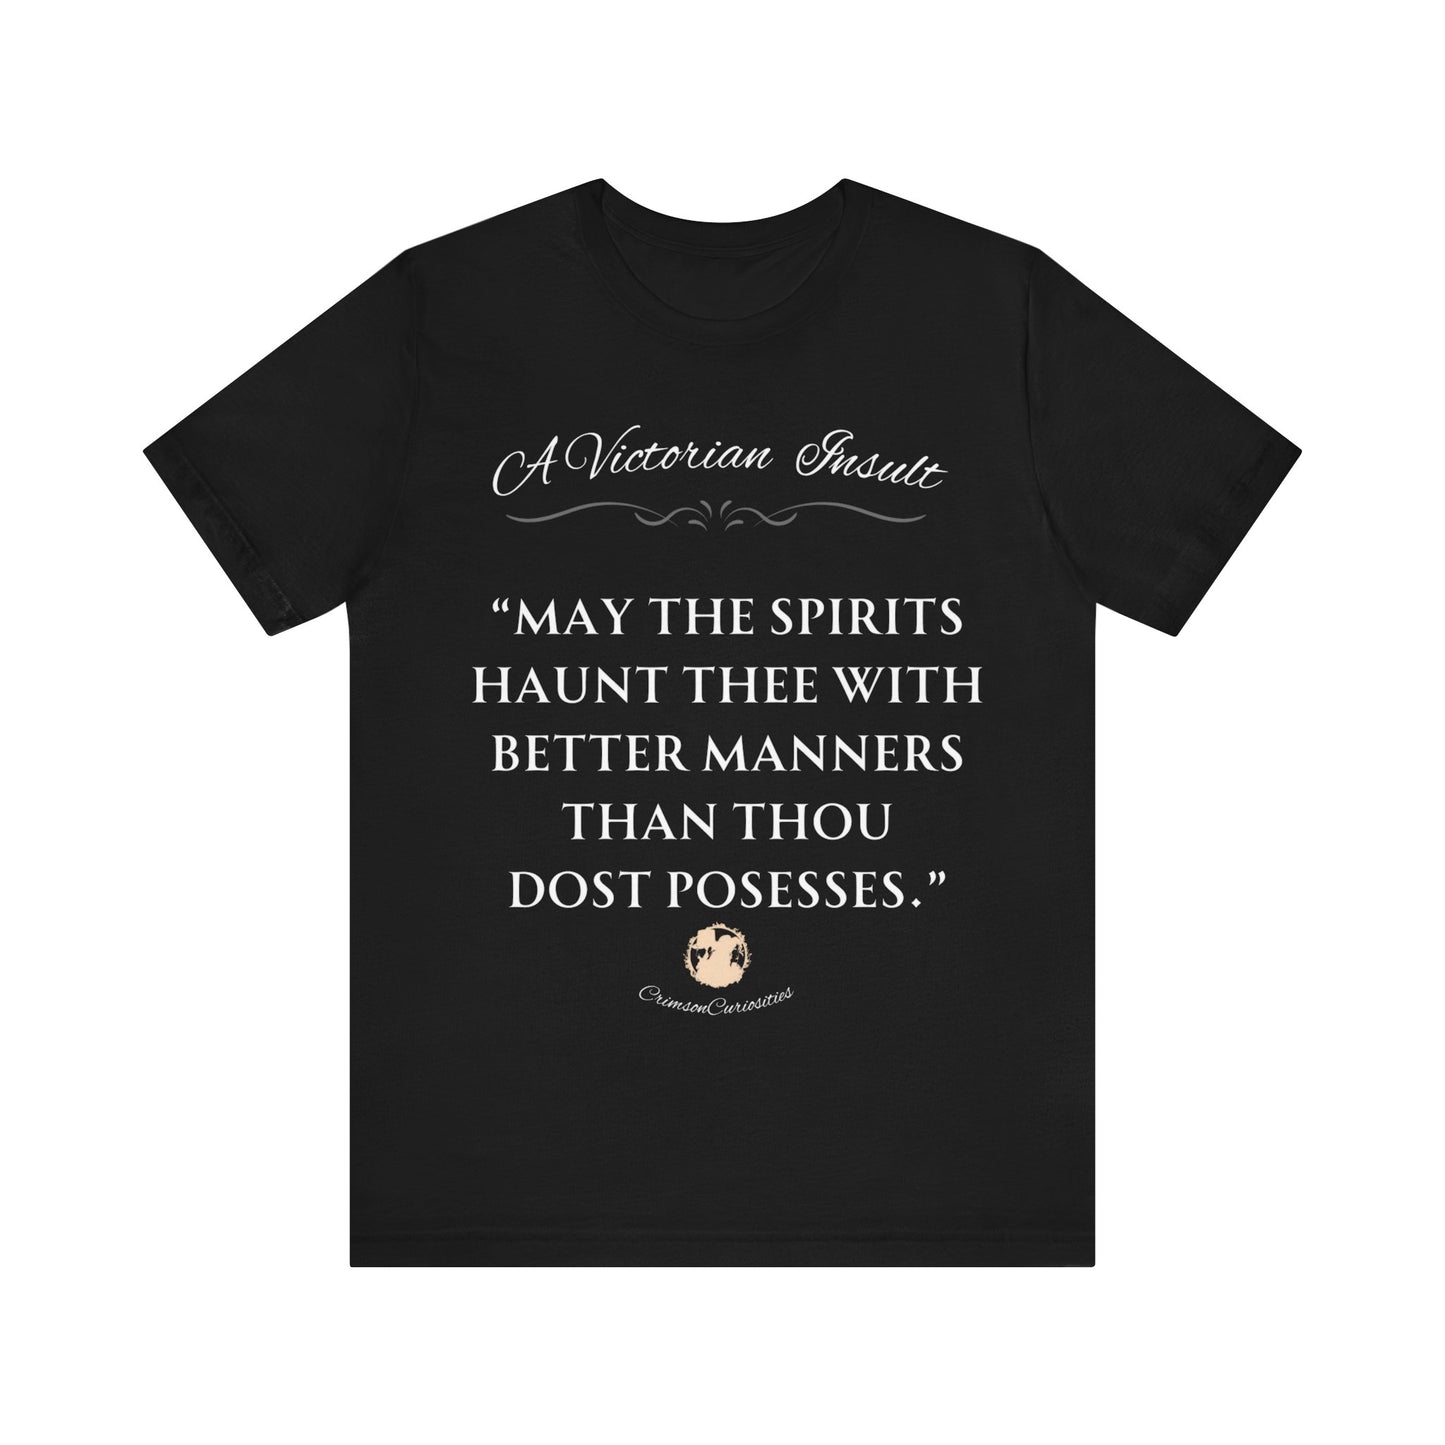 A Victorian Insult Tee: Haunt Thee with Manners